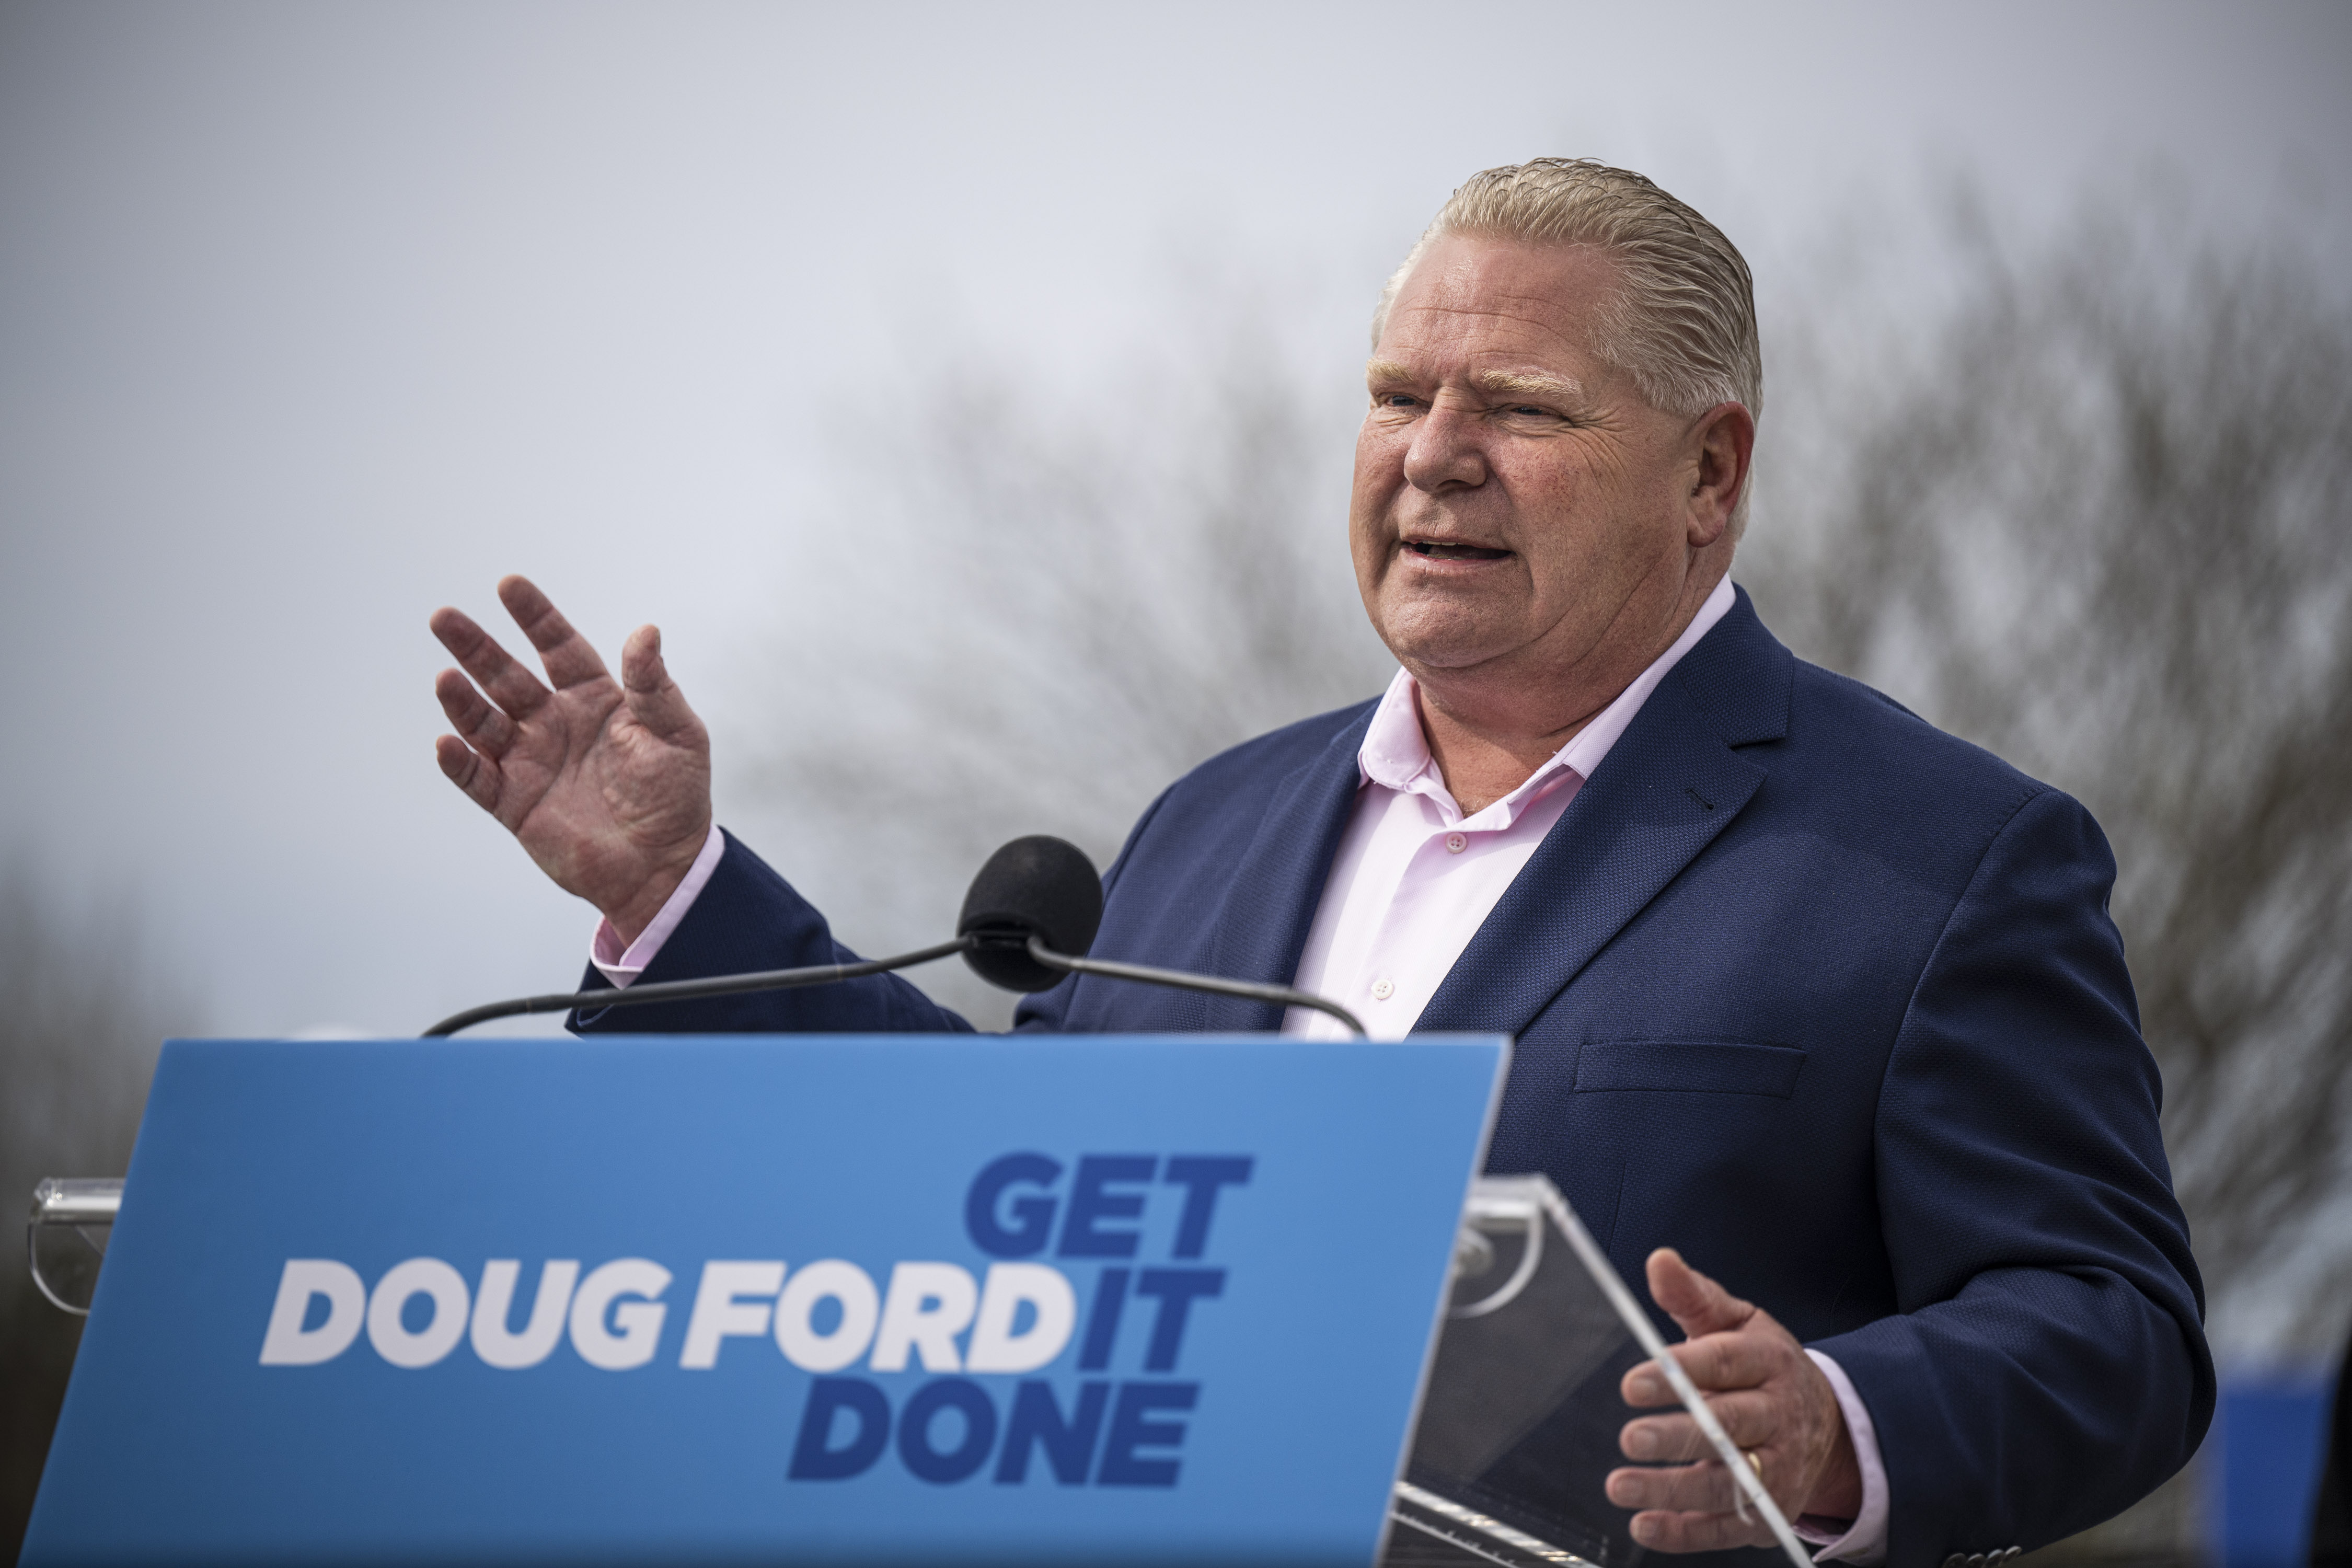 Ontario premier calls cost of gas ‘absolutely disgusting,’ raises price-gouging concerns